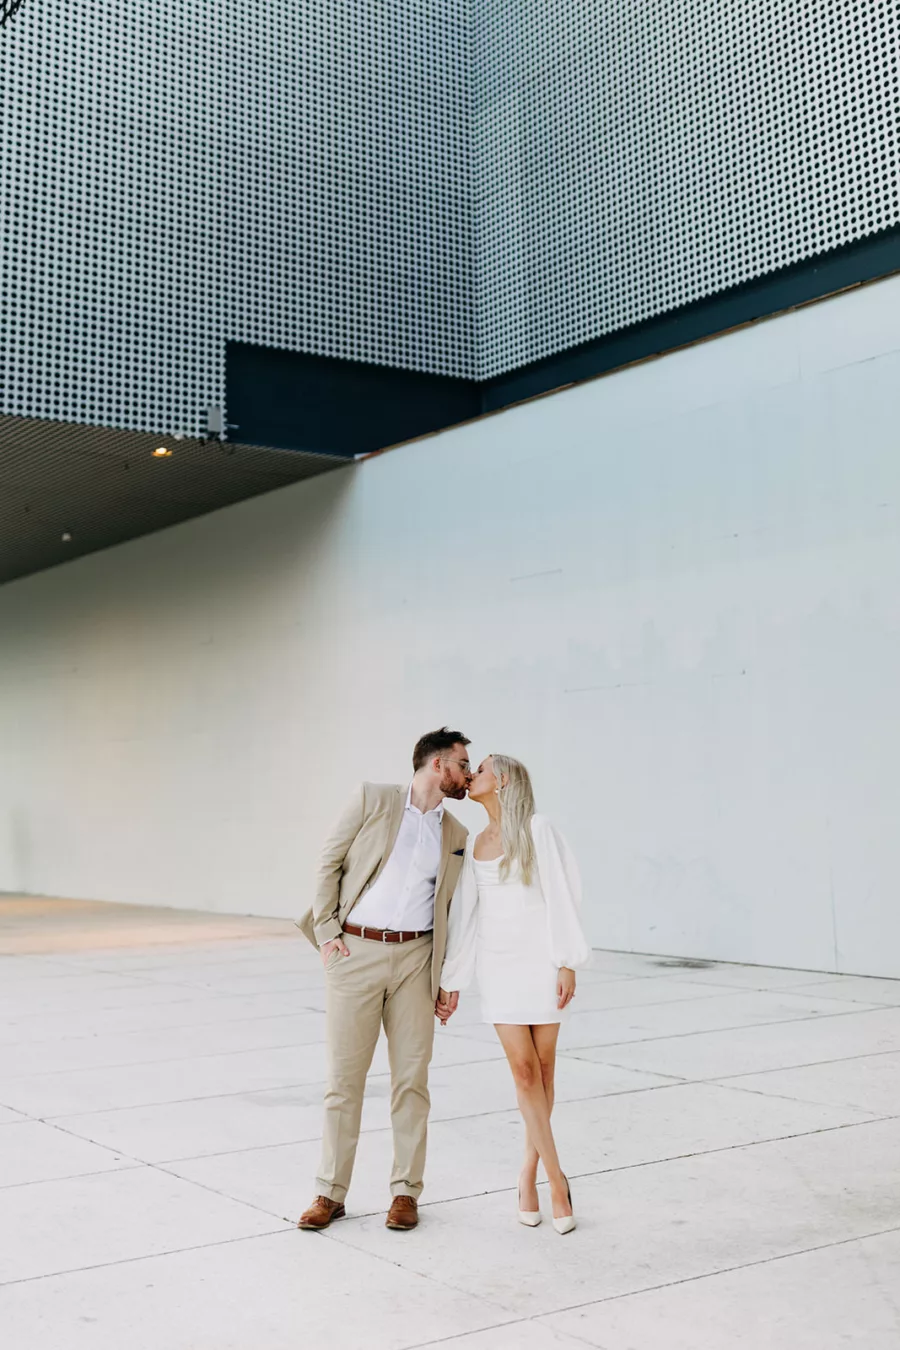 Downtown Tampa Curtis Hixon Riverwalk Engagement Session Photographer | Amber McWhorter Photography